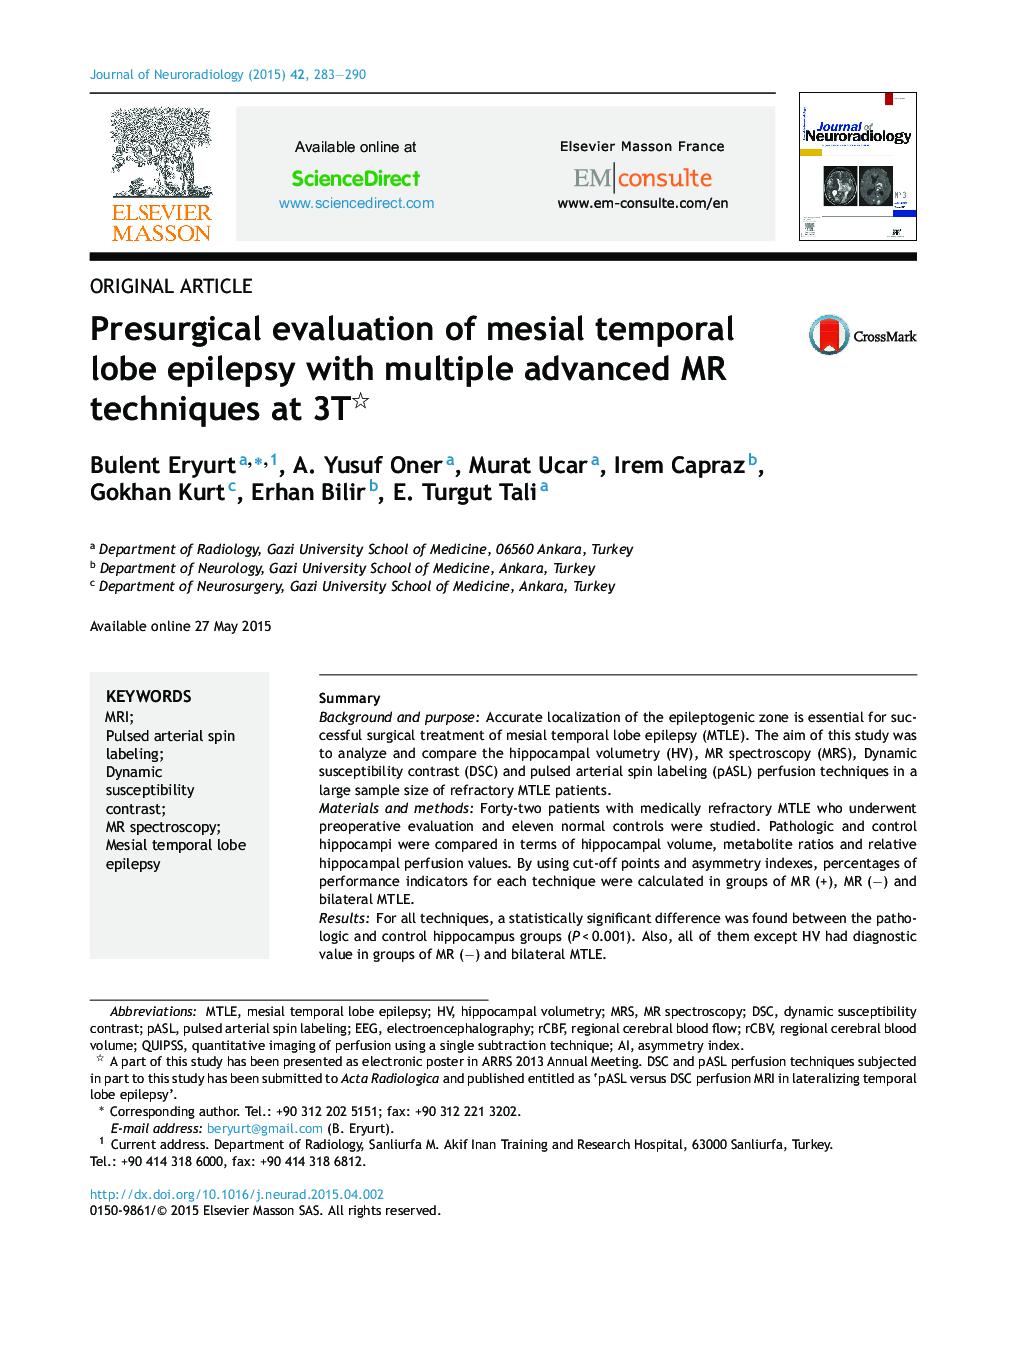 Presurgical evaluation of mesial temporal lobe epilepsy with multiple advanced MR techniques at 3T 